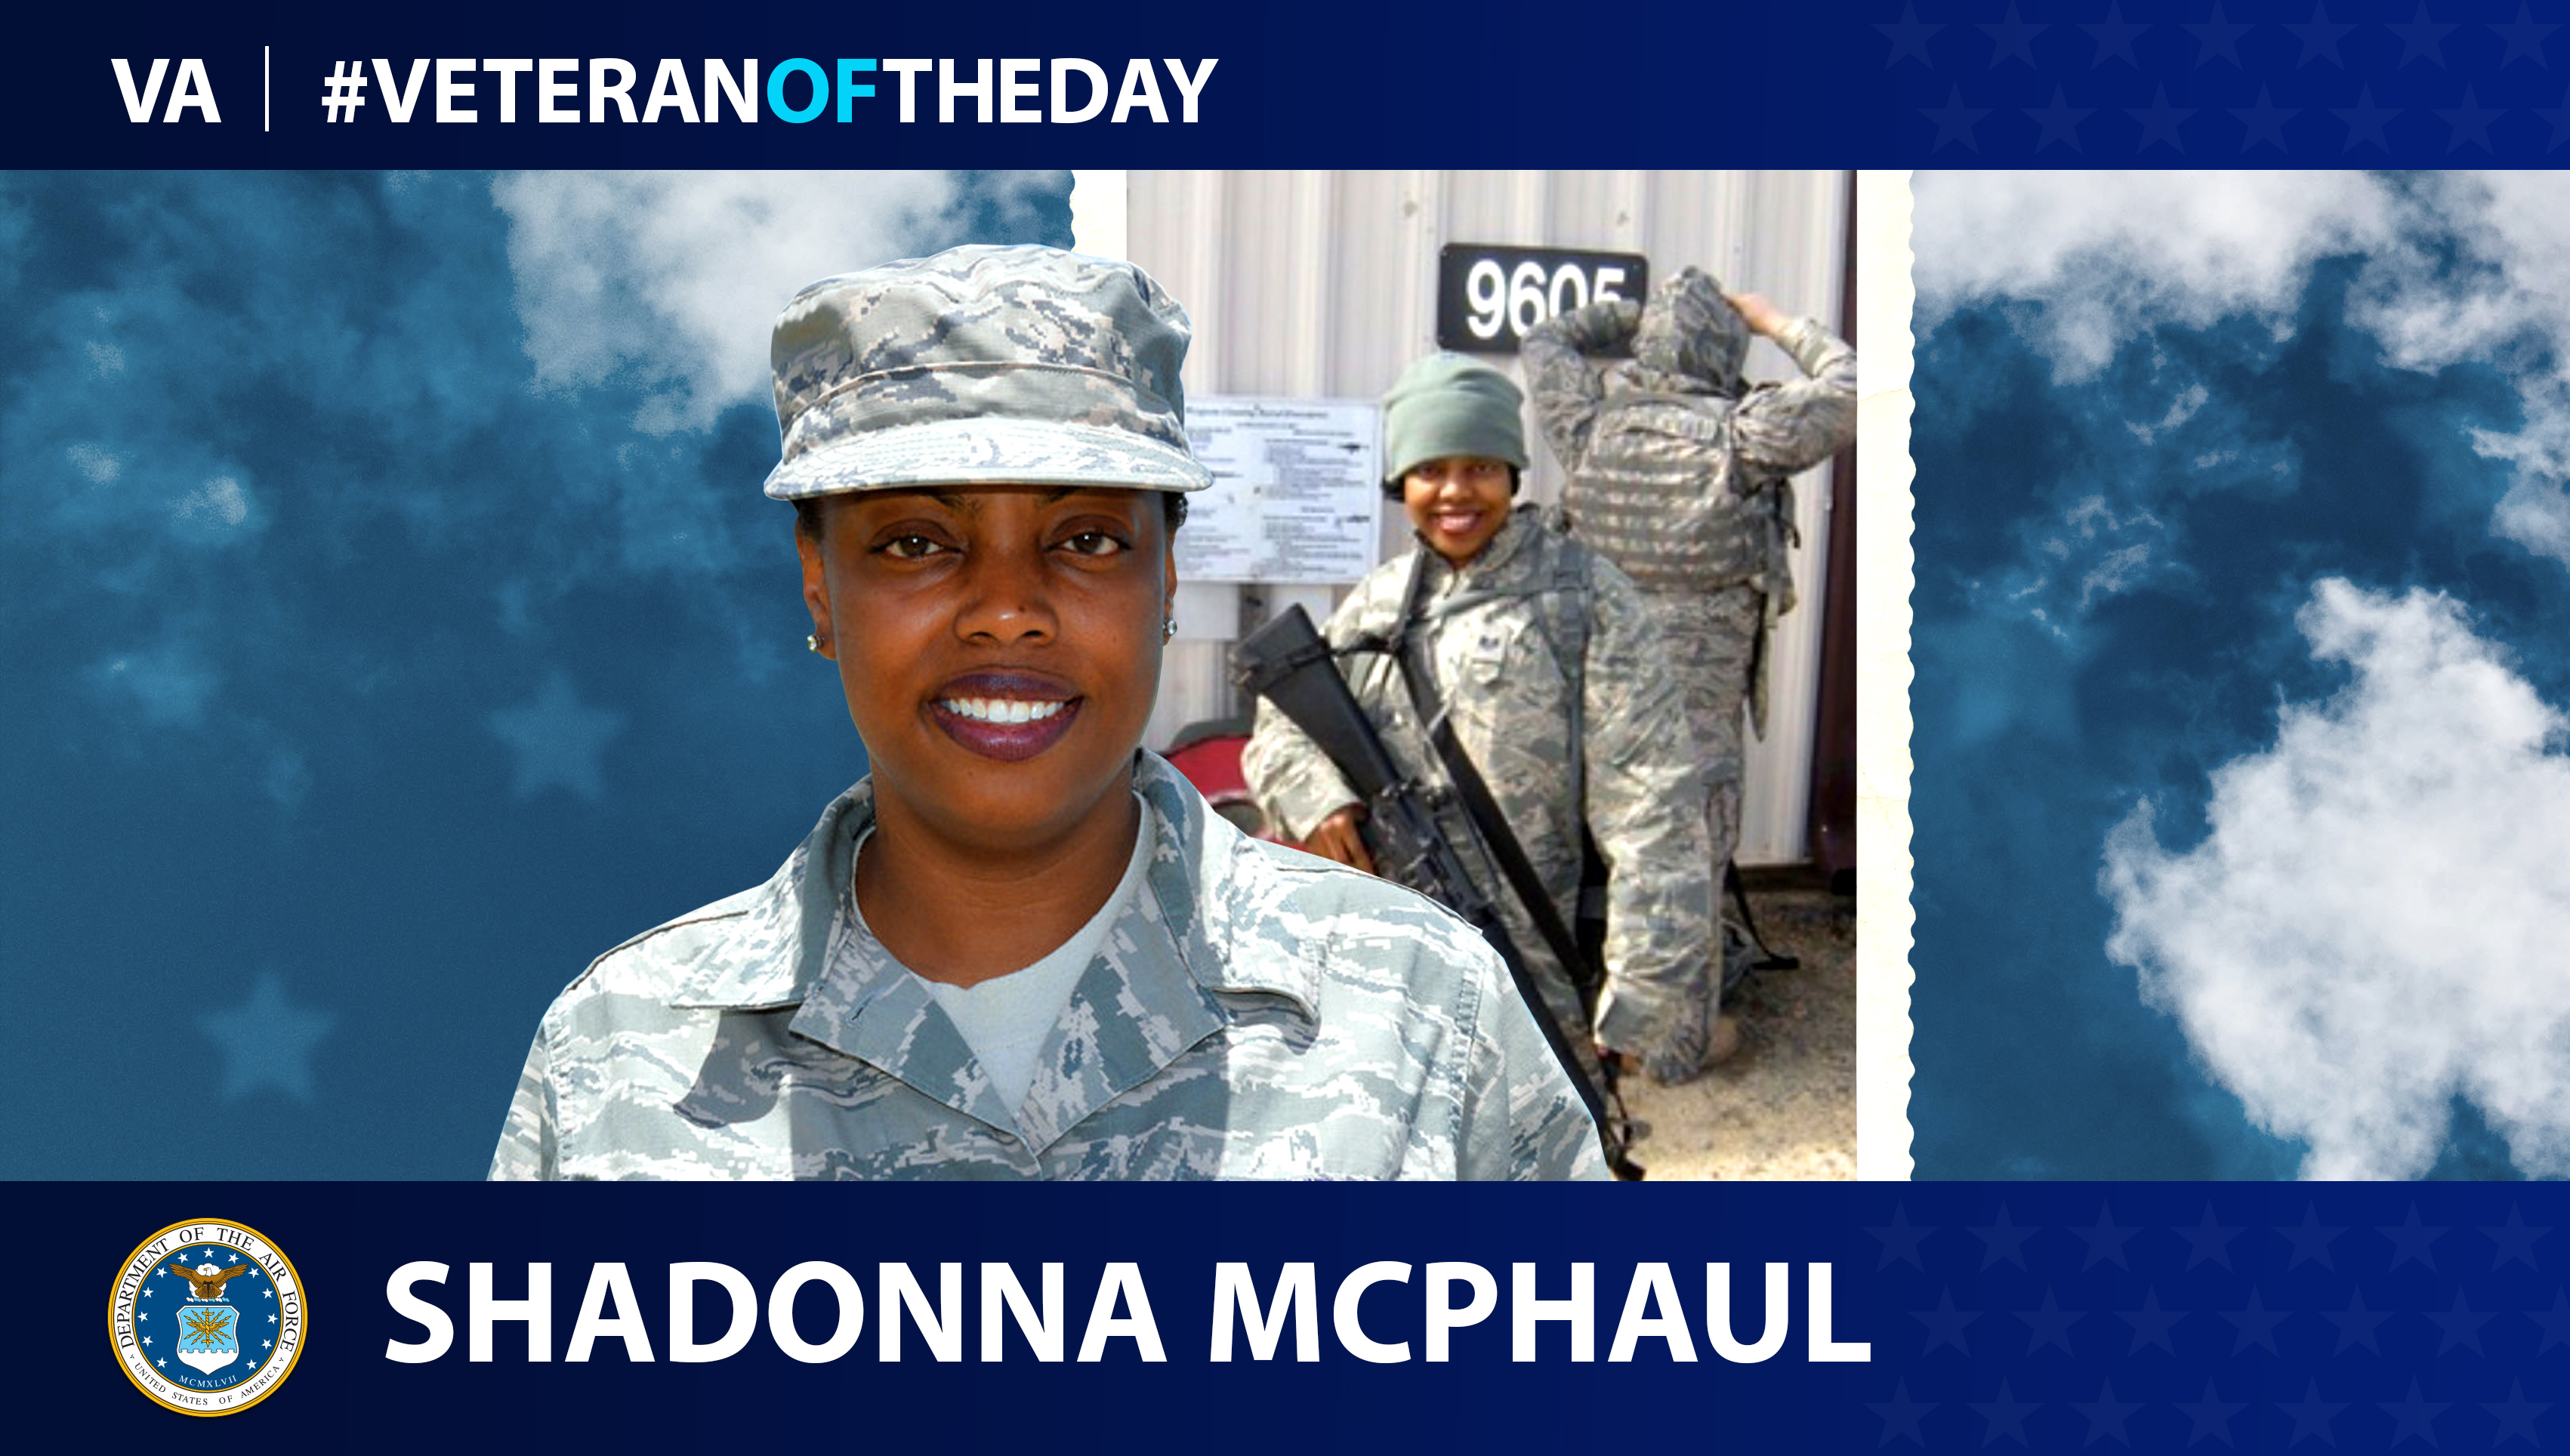 Air Force Veteran ShaDonna McPhaul is today's Veteran of the Day.